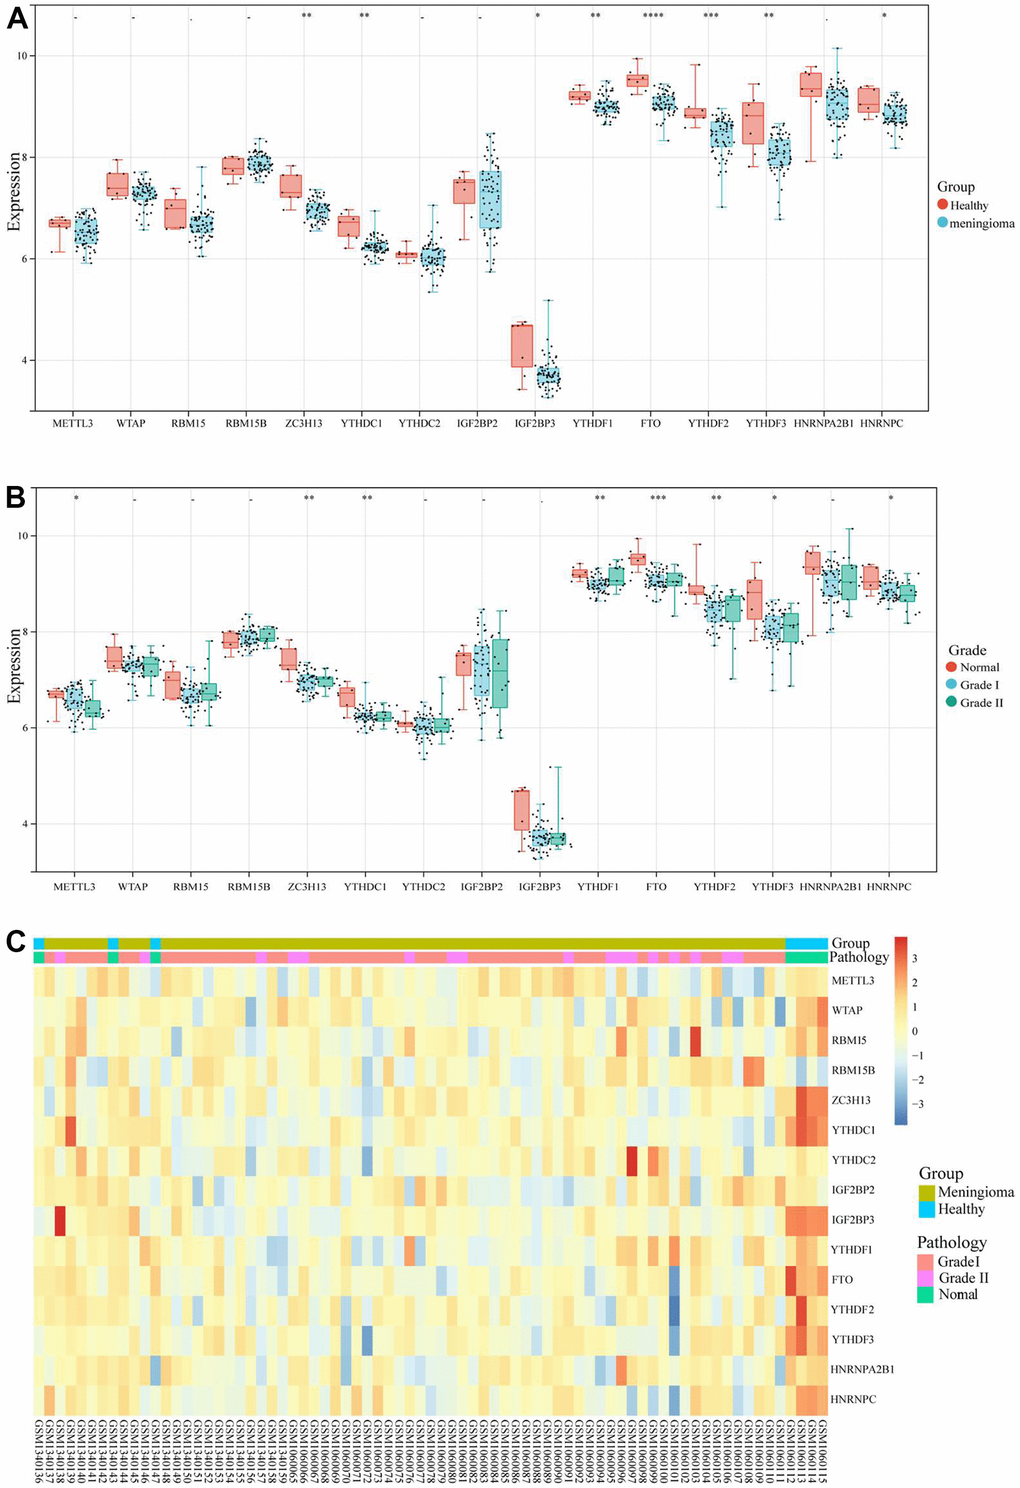 m6A regulatory genes expression level of GSE55609, GSE43290 datasets. (A) The expression levels of 15 m6A regulatory genes in healthy samples and meningioma samples. (B) The expression levels of 15 m6A regulatory genes in different WHO grades (Grade I, Grade II) meningioma samples and normal samples. (C) Heatmap of 15 m6A regulatory genes expression level. *